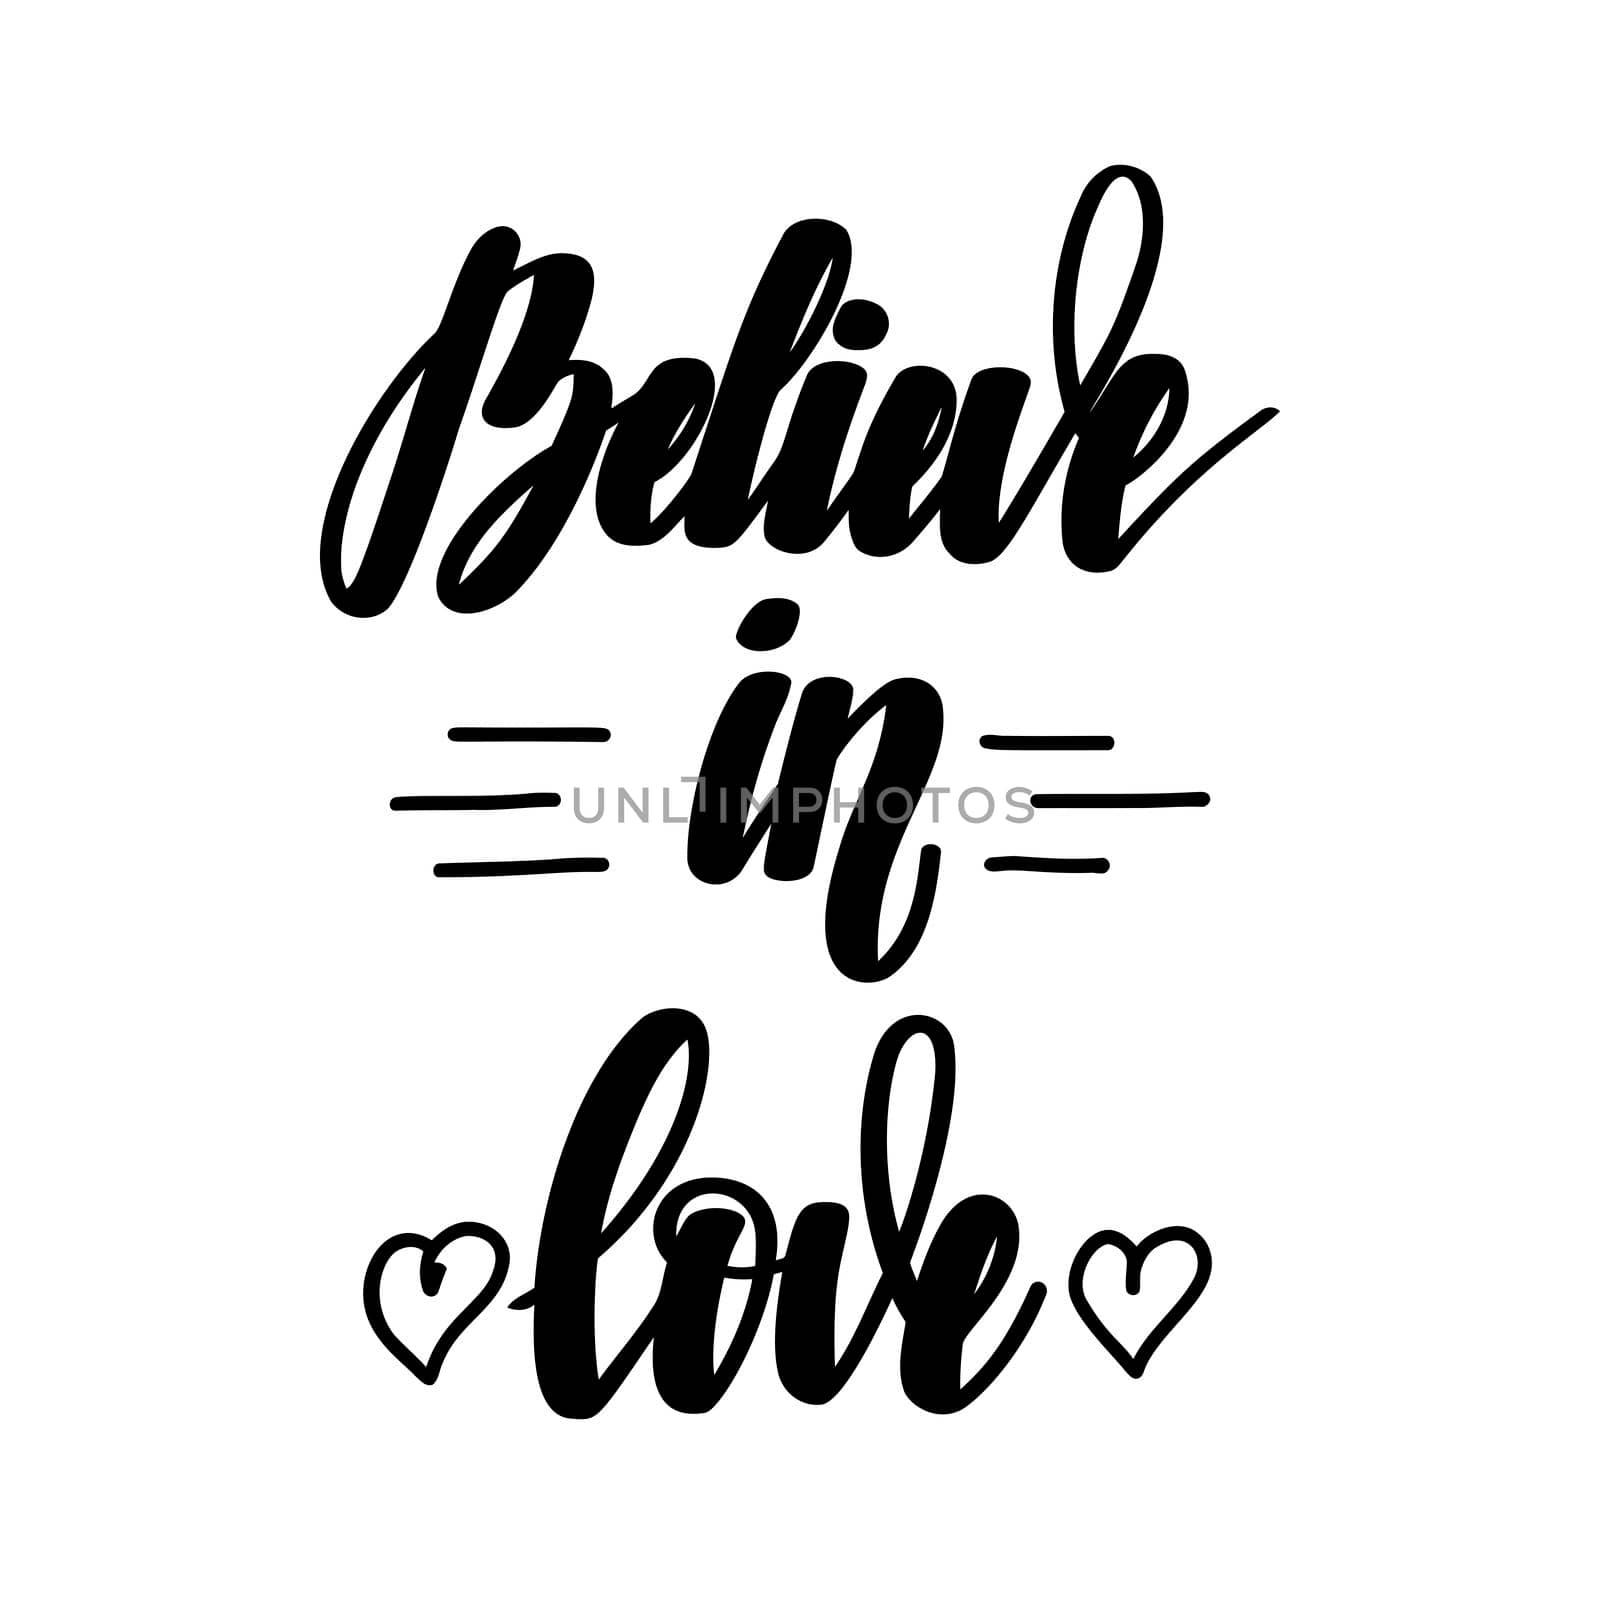 Believe in love. Romantic handwritten lettering isolated on white background. illustration for posters, cards, print on T-shirts and much more.